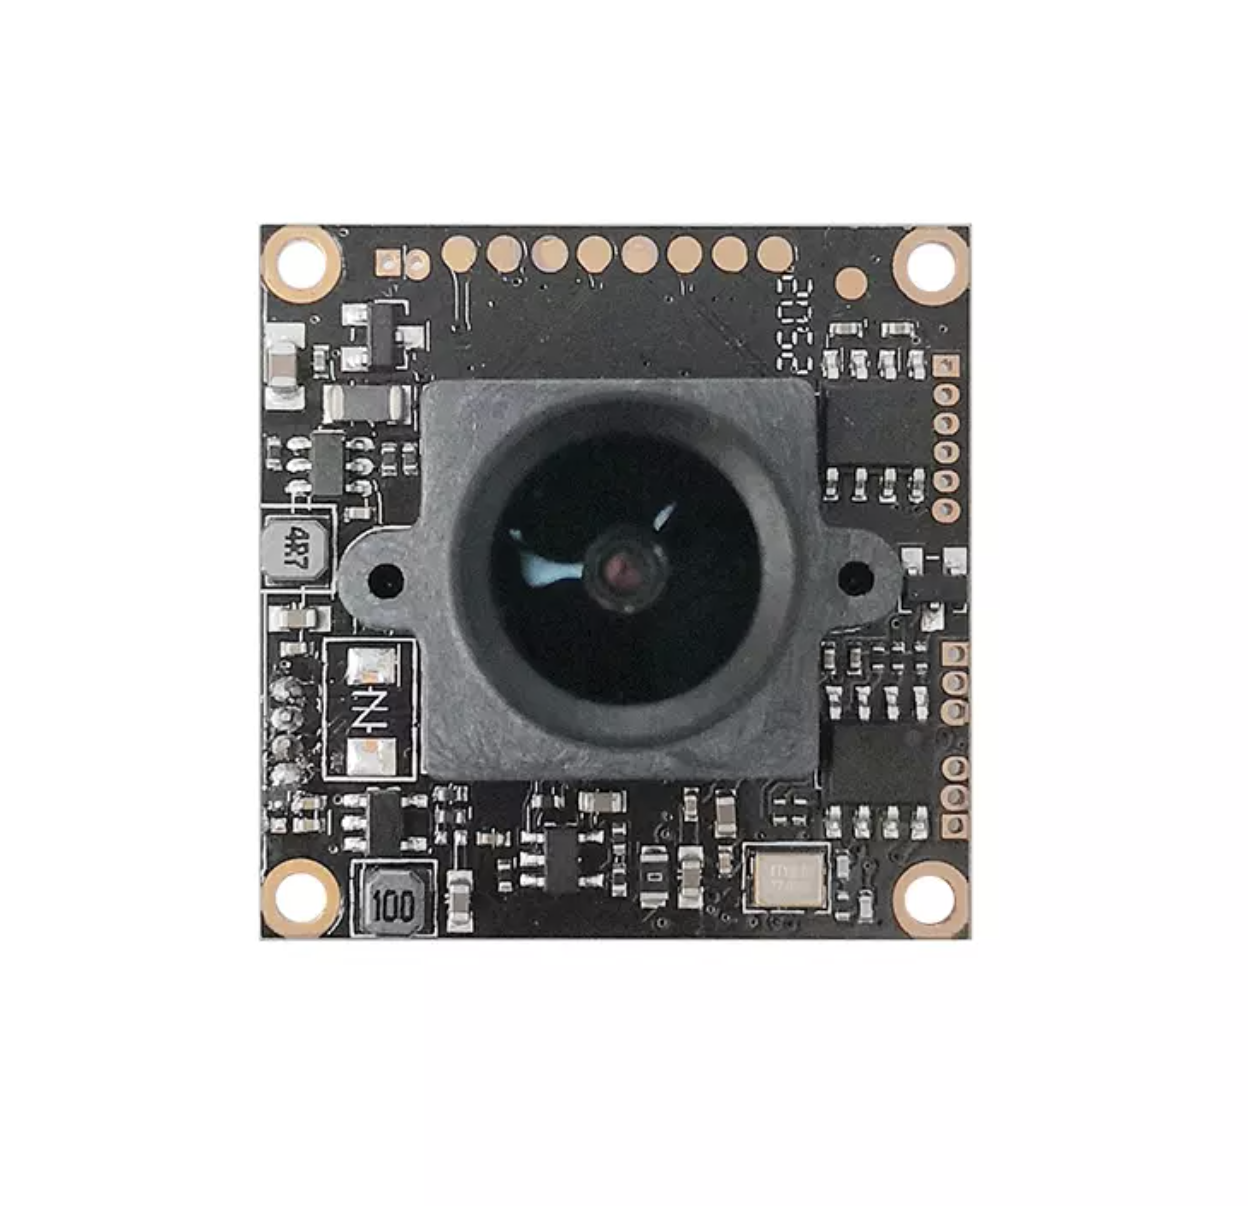 New Arrival China Vga Cmos Camera Module - Factory AHD TVI CVI CVBS four-in-one coaxial output IMX307 2MP 1080P USB starlight night vision support UTC HDR camera module – Ronghua